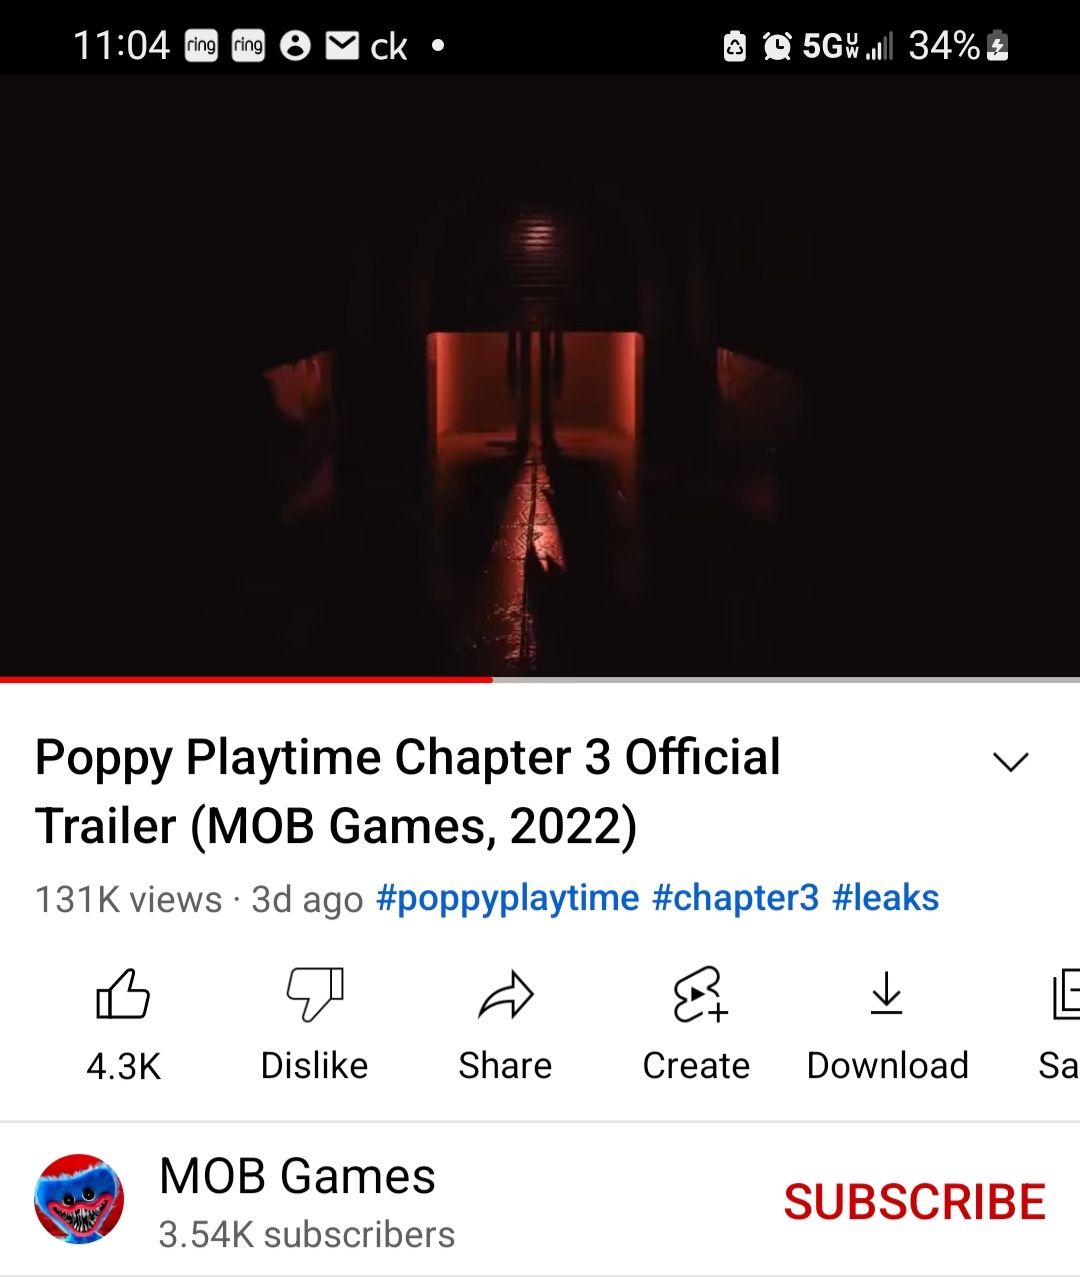 Poppy Playtime Chapter 3 - NEW TEASER 2022 Watch Now